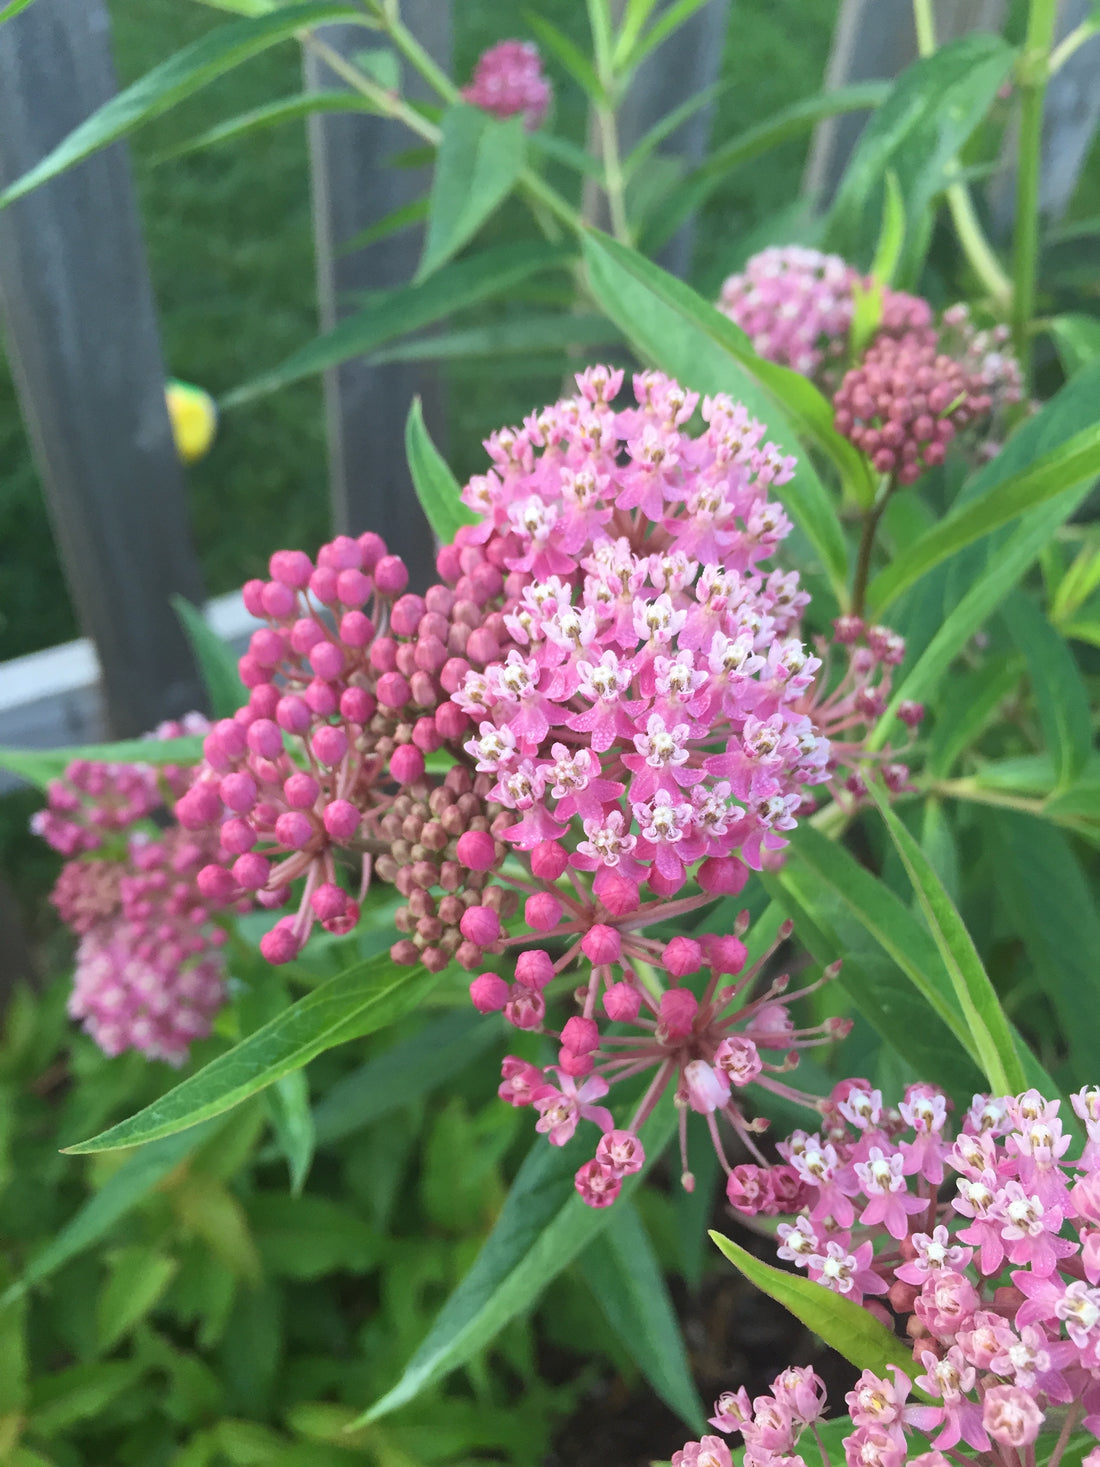 Swamp Milkweed (Asclepias incarnata) has showy pink flowers that pollinators can&